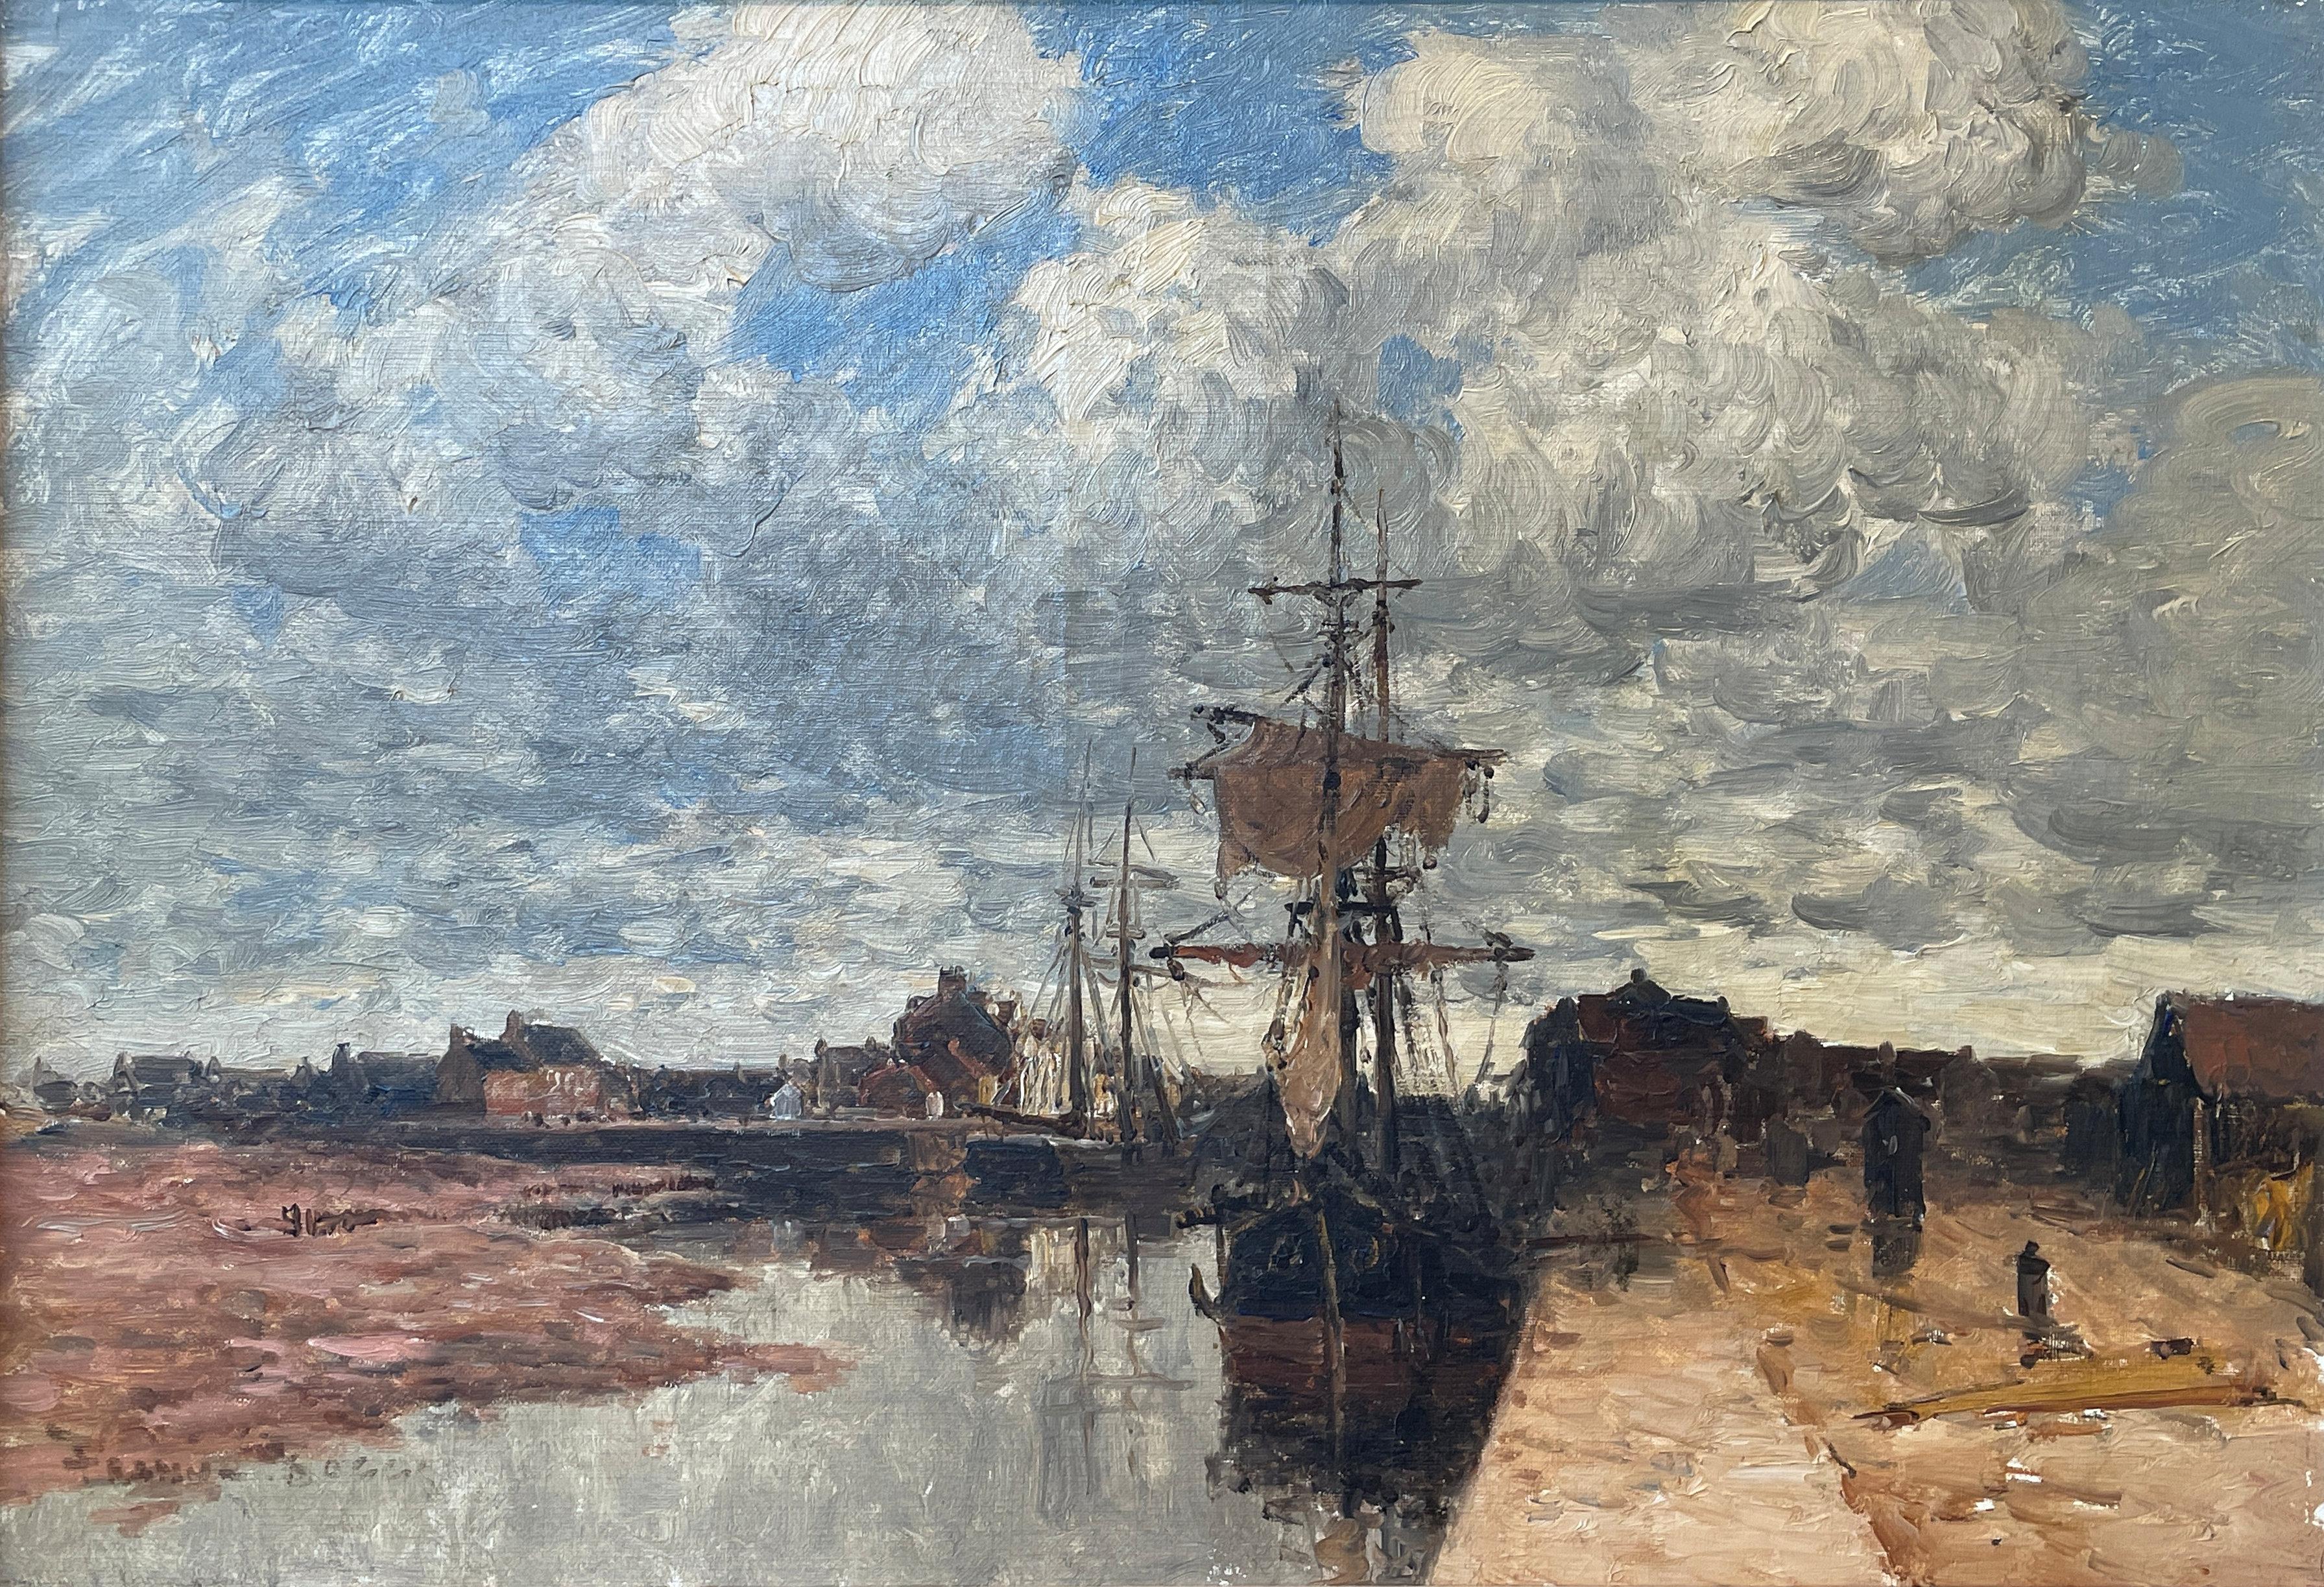 Frank Myers Boggs
Bateau au Quai (Docked Sailing Vessel at Low Tide)
Signed lower left
Oil on canvas
15 x 21 1/2 inches

Provenance:
David Findlay Galleries, New York
Charles R. Brown Fine Art, Locust Valley, New York

The Impressionist Frank Myers